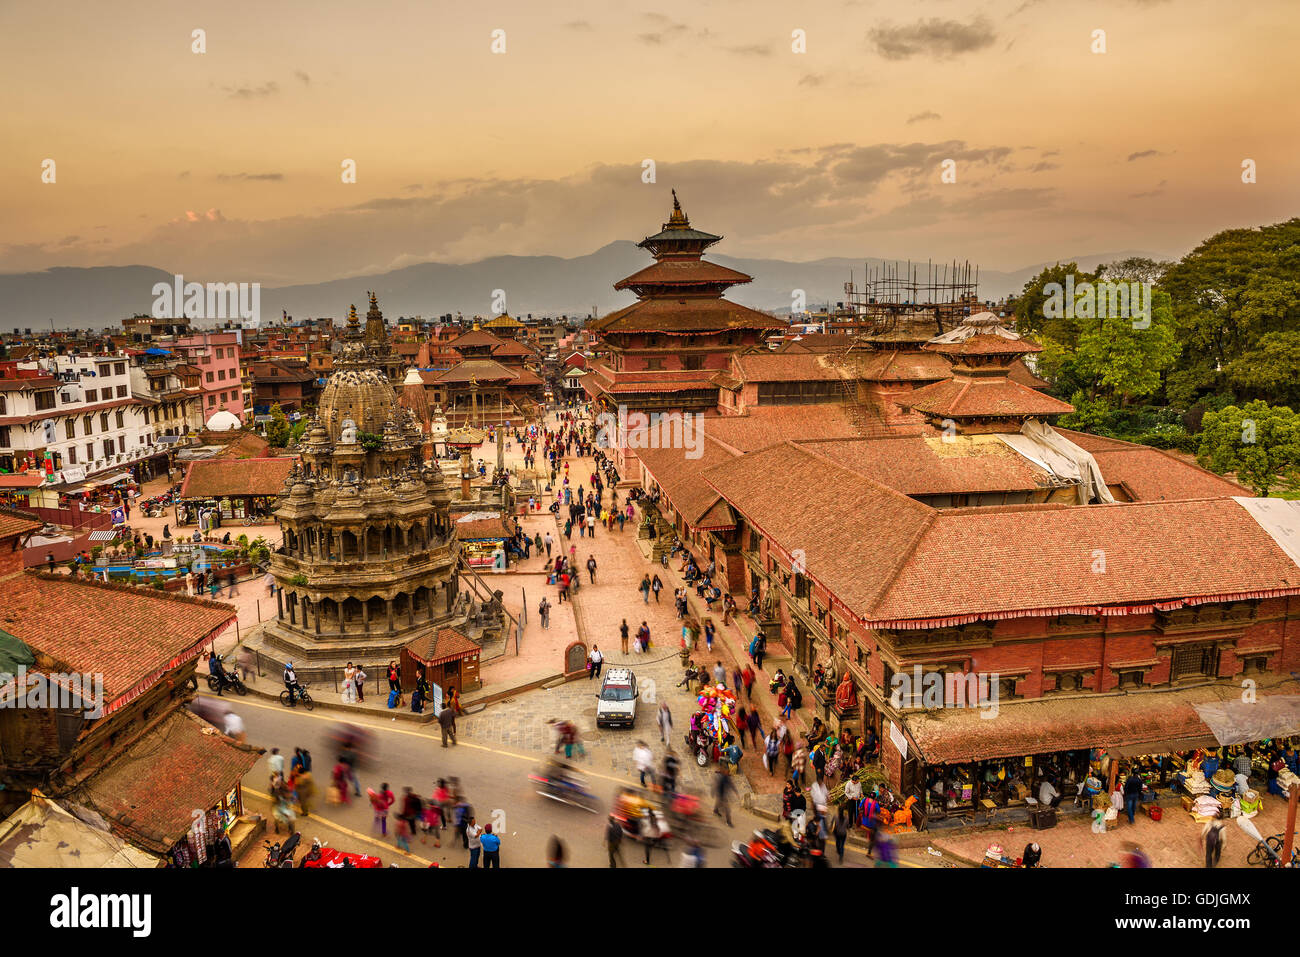 Sunset over Patan Durbar Square in Nepal Foto Stock